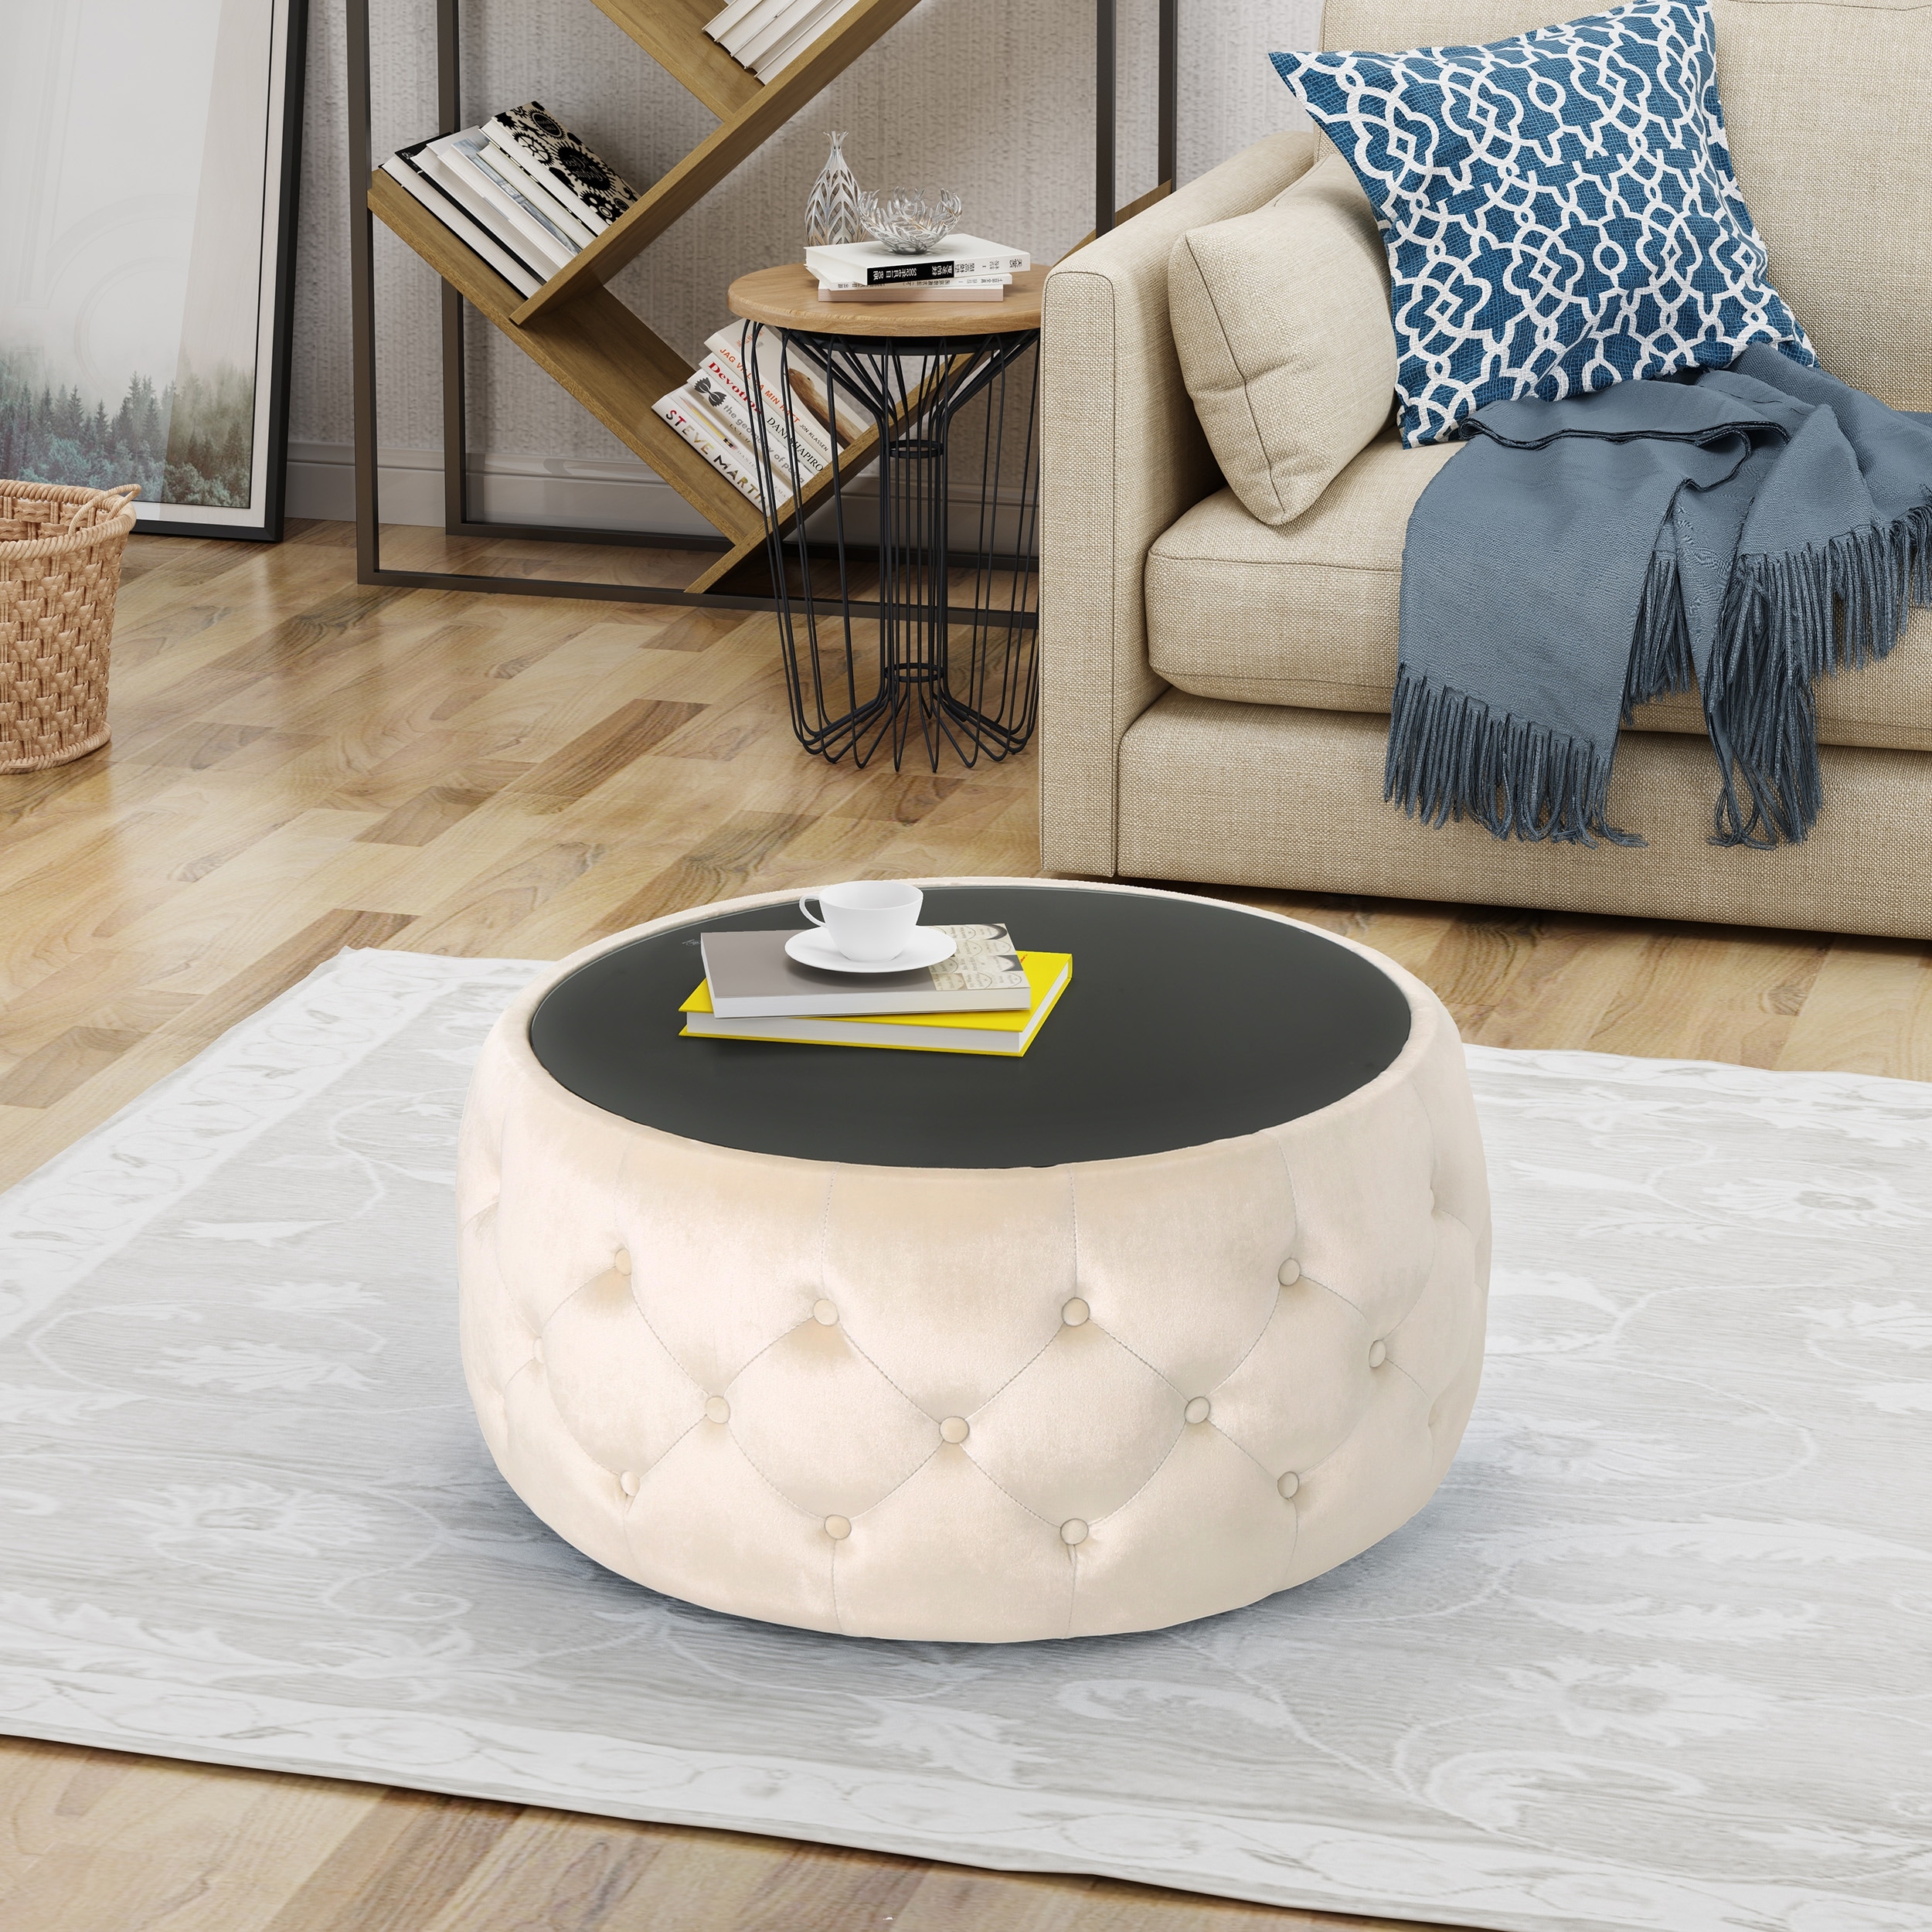 https://ak1.ostkcdn.com/images/products/is/images/direct/2c3329264f865c1bb2c66dacb9ec5bcd1bd7b587/Chana-Glam-Velvet-and-Tempered-Glass-Coffee-Table-Ottoman-by-Christopher-Knight-Home.jpg